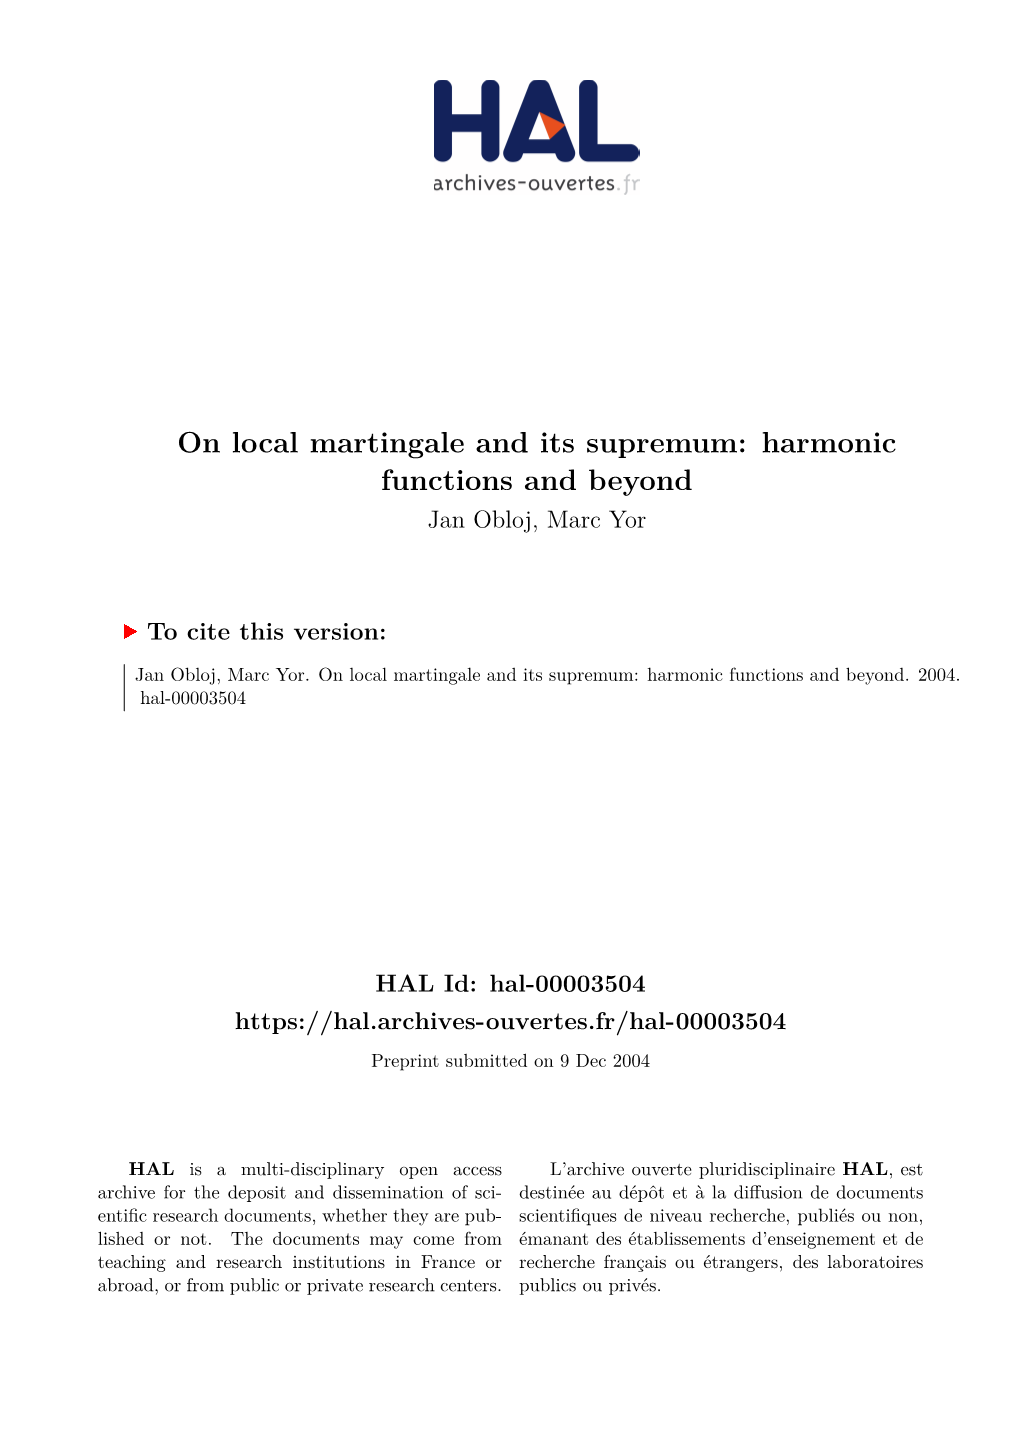 On Local Martingale and Its Supremum: Harmonic Functions and Beyond Jan Obloj, Marc Yor